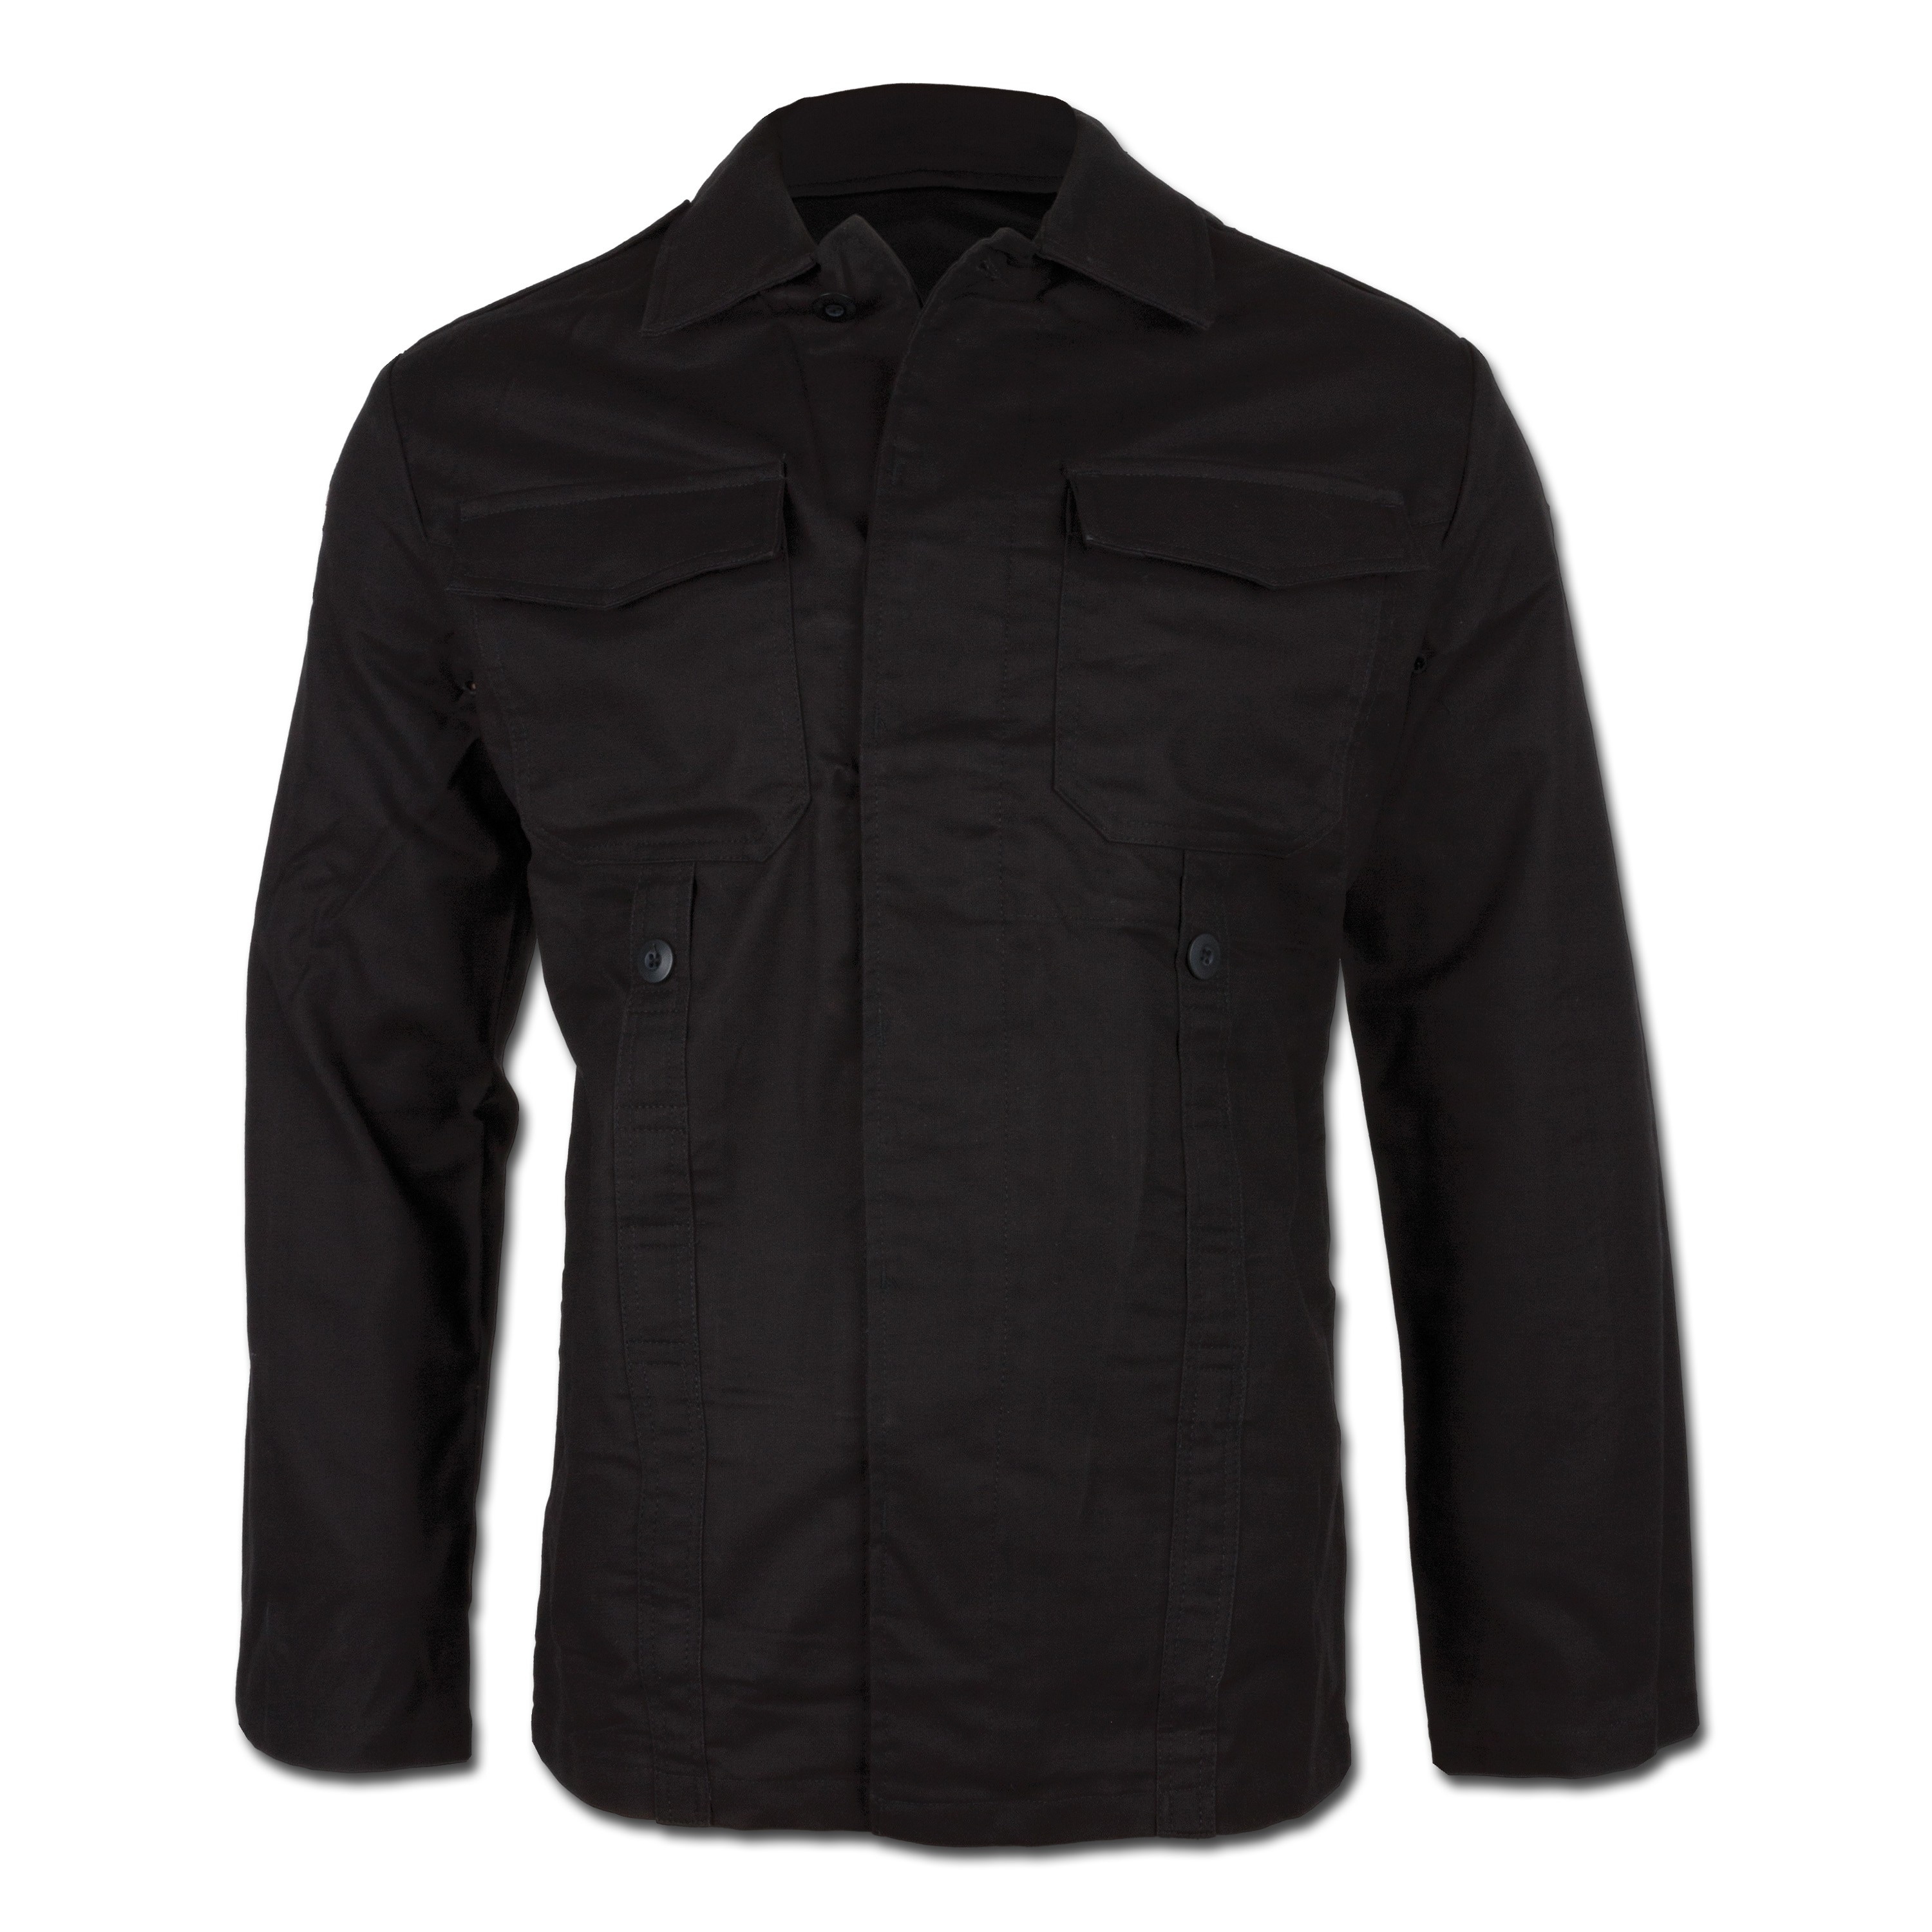 Purchase the Moleskin Jacket Old Style black by ASMC